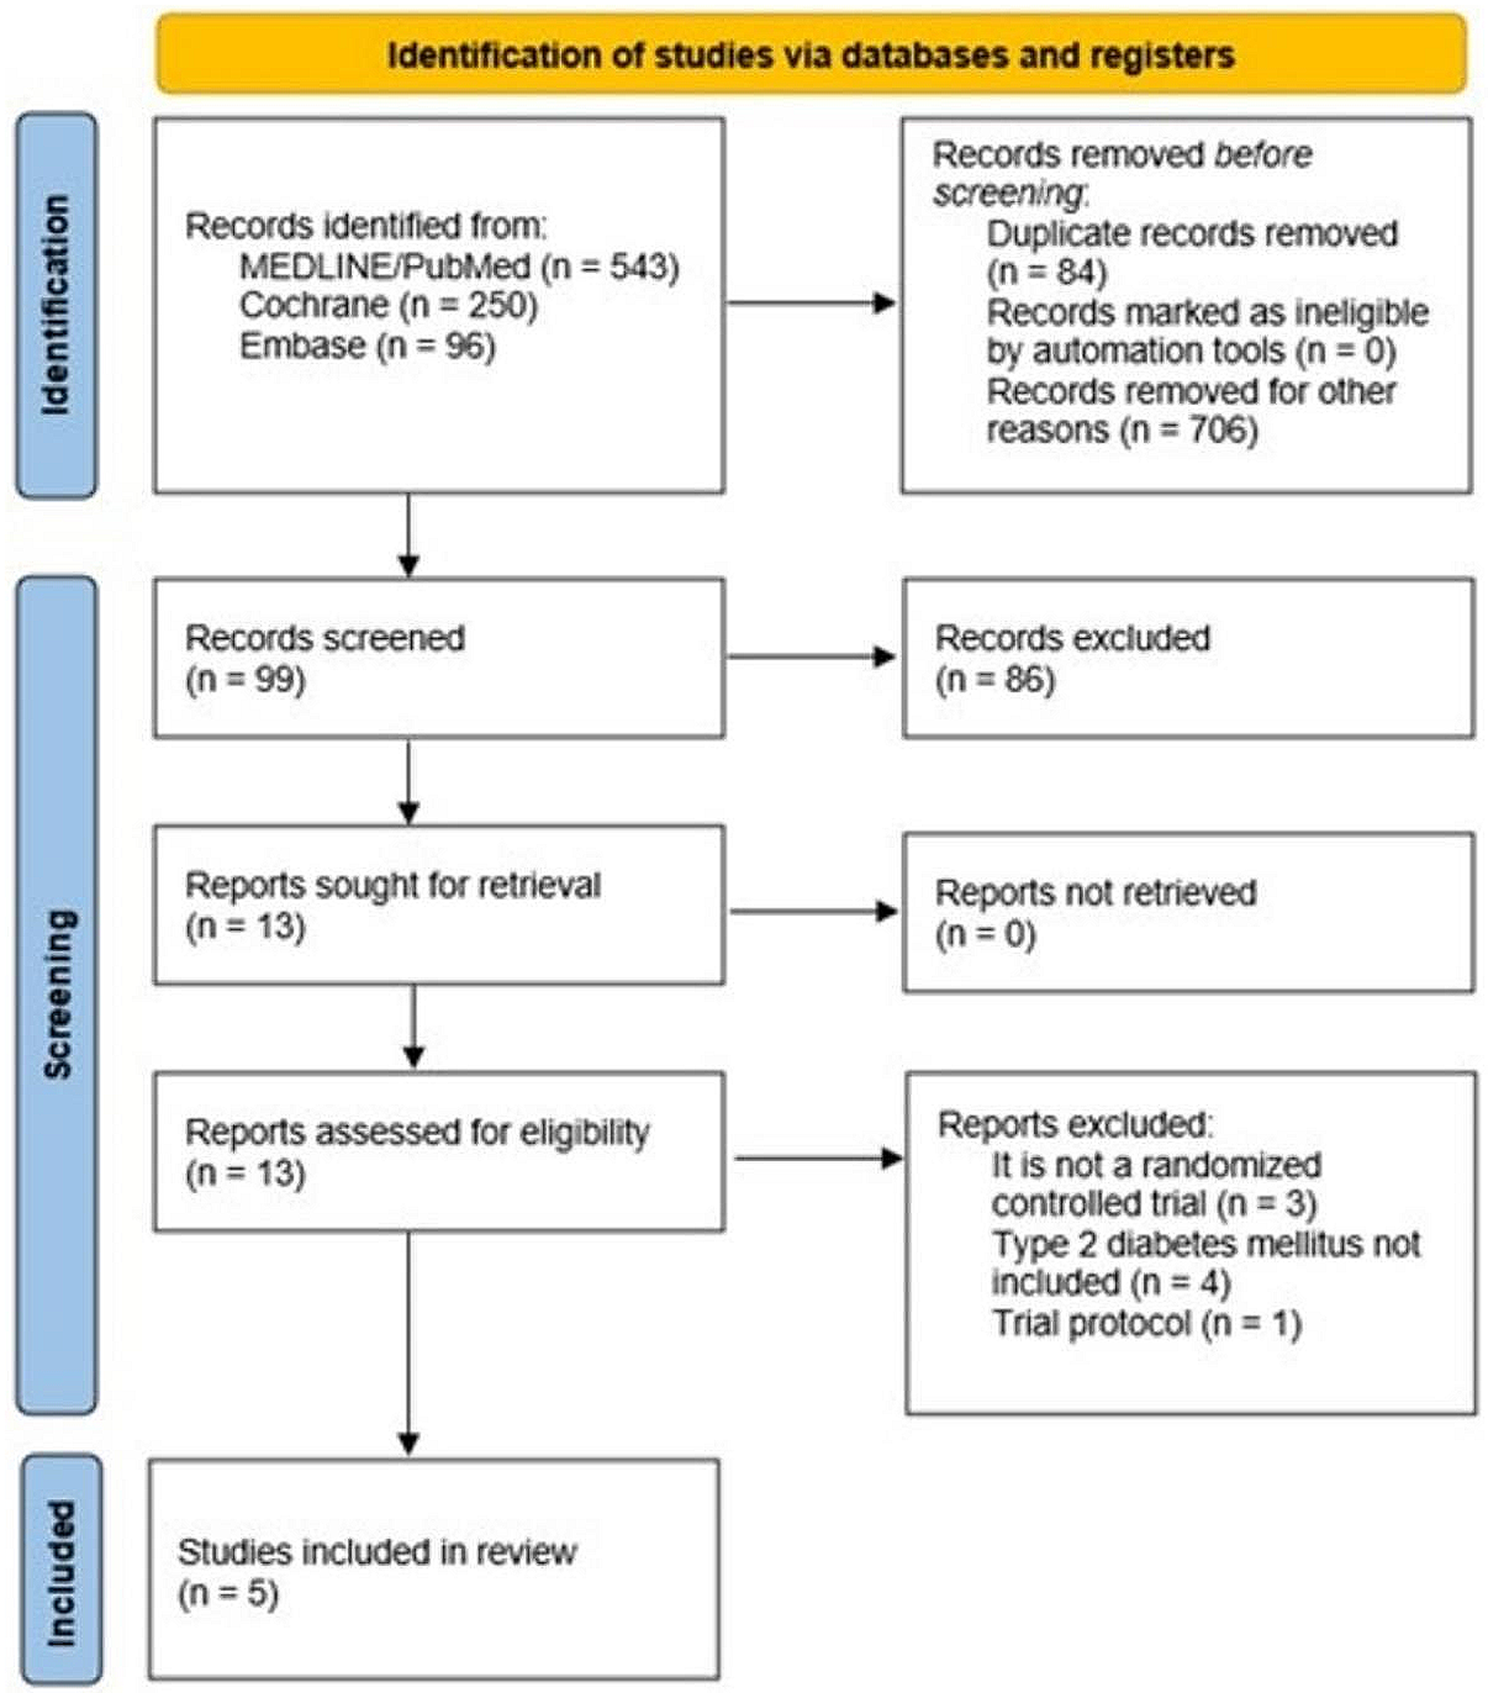 The efficacy and safety of GLP-1 receptor agonists in youth with type 2 diabetes: a meta-analysis